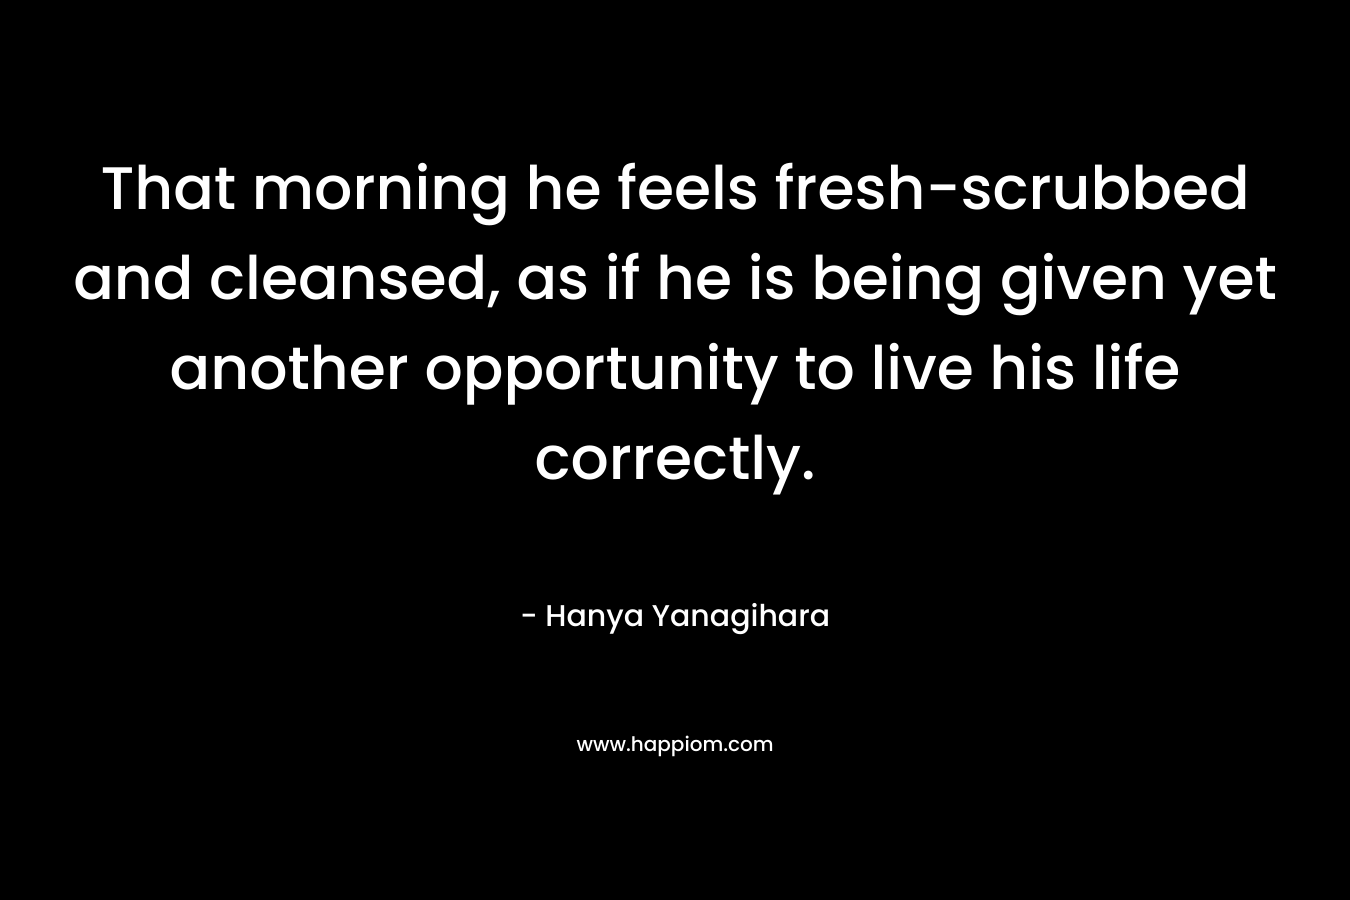 That morning he feels fresh-scrubbed and cleansed, as if he is being given yet another opportunity to live his life correctly.